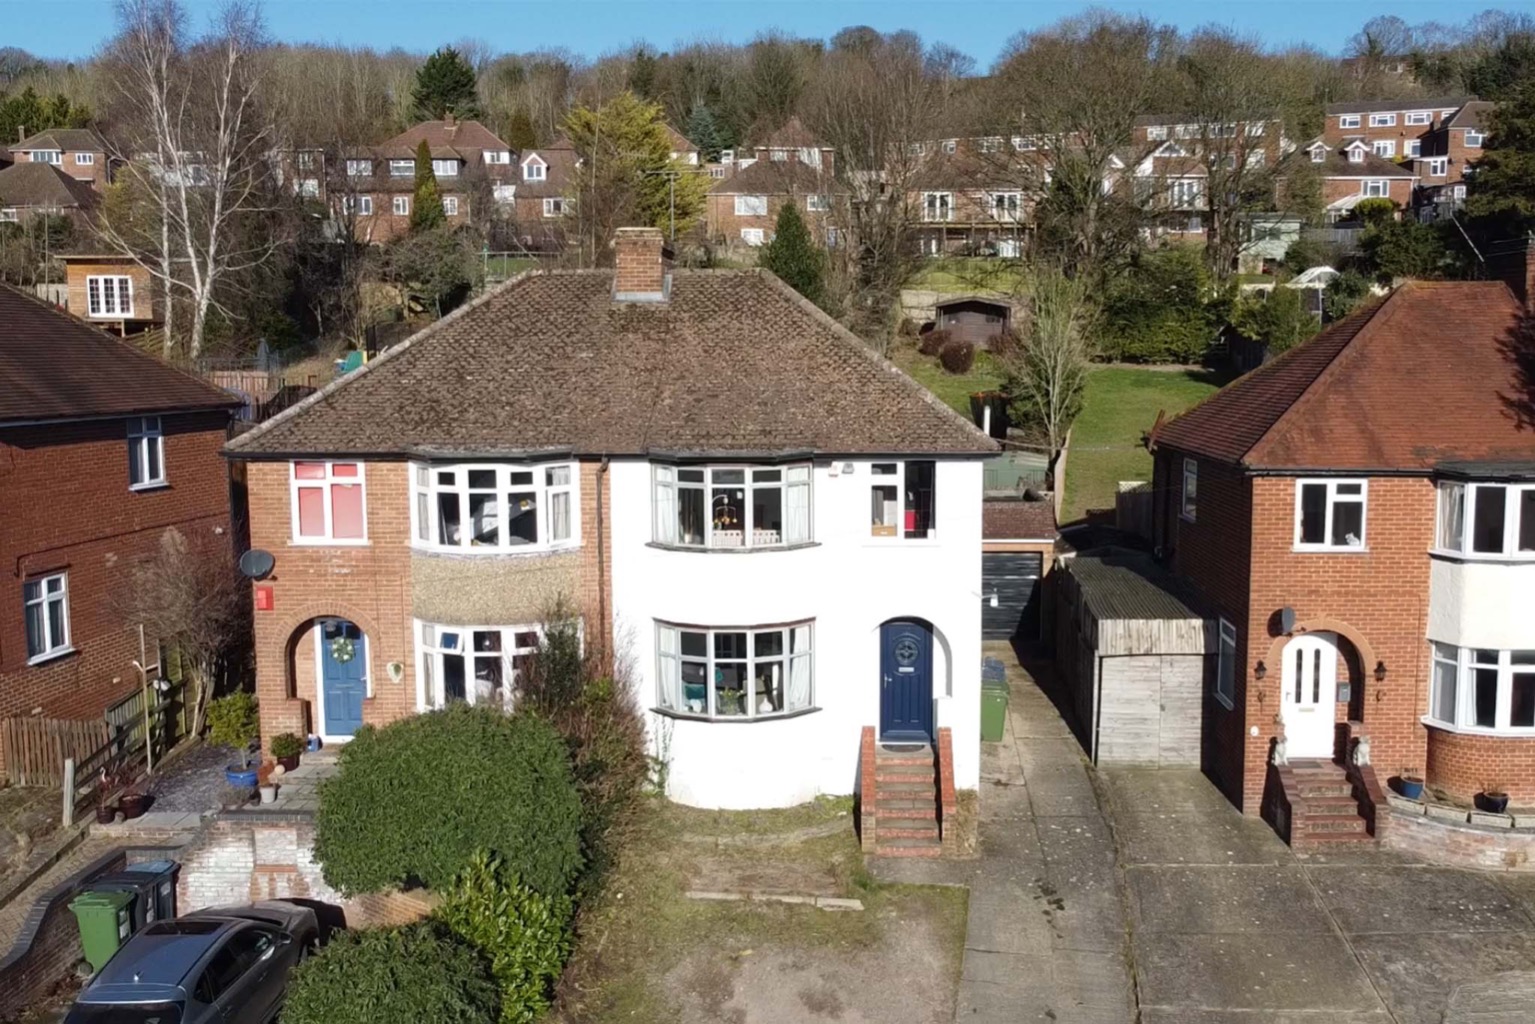 **Check Out The Property Video** At the end of a cul-de-sac, this three bedroom semi detached home comes with driveway parking for several vehicles, a garage and a large rear garden. Inside the bathroom has been recently refitted and there is also a brand new combi boiler.